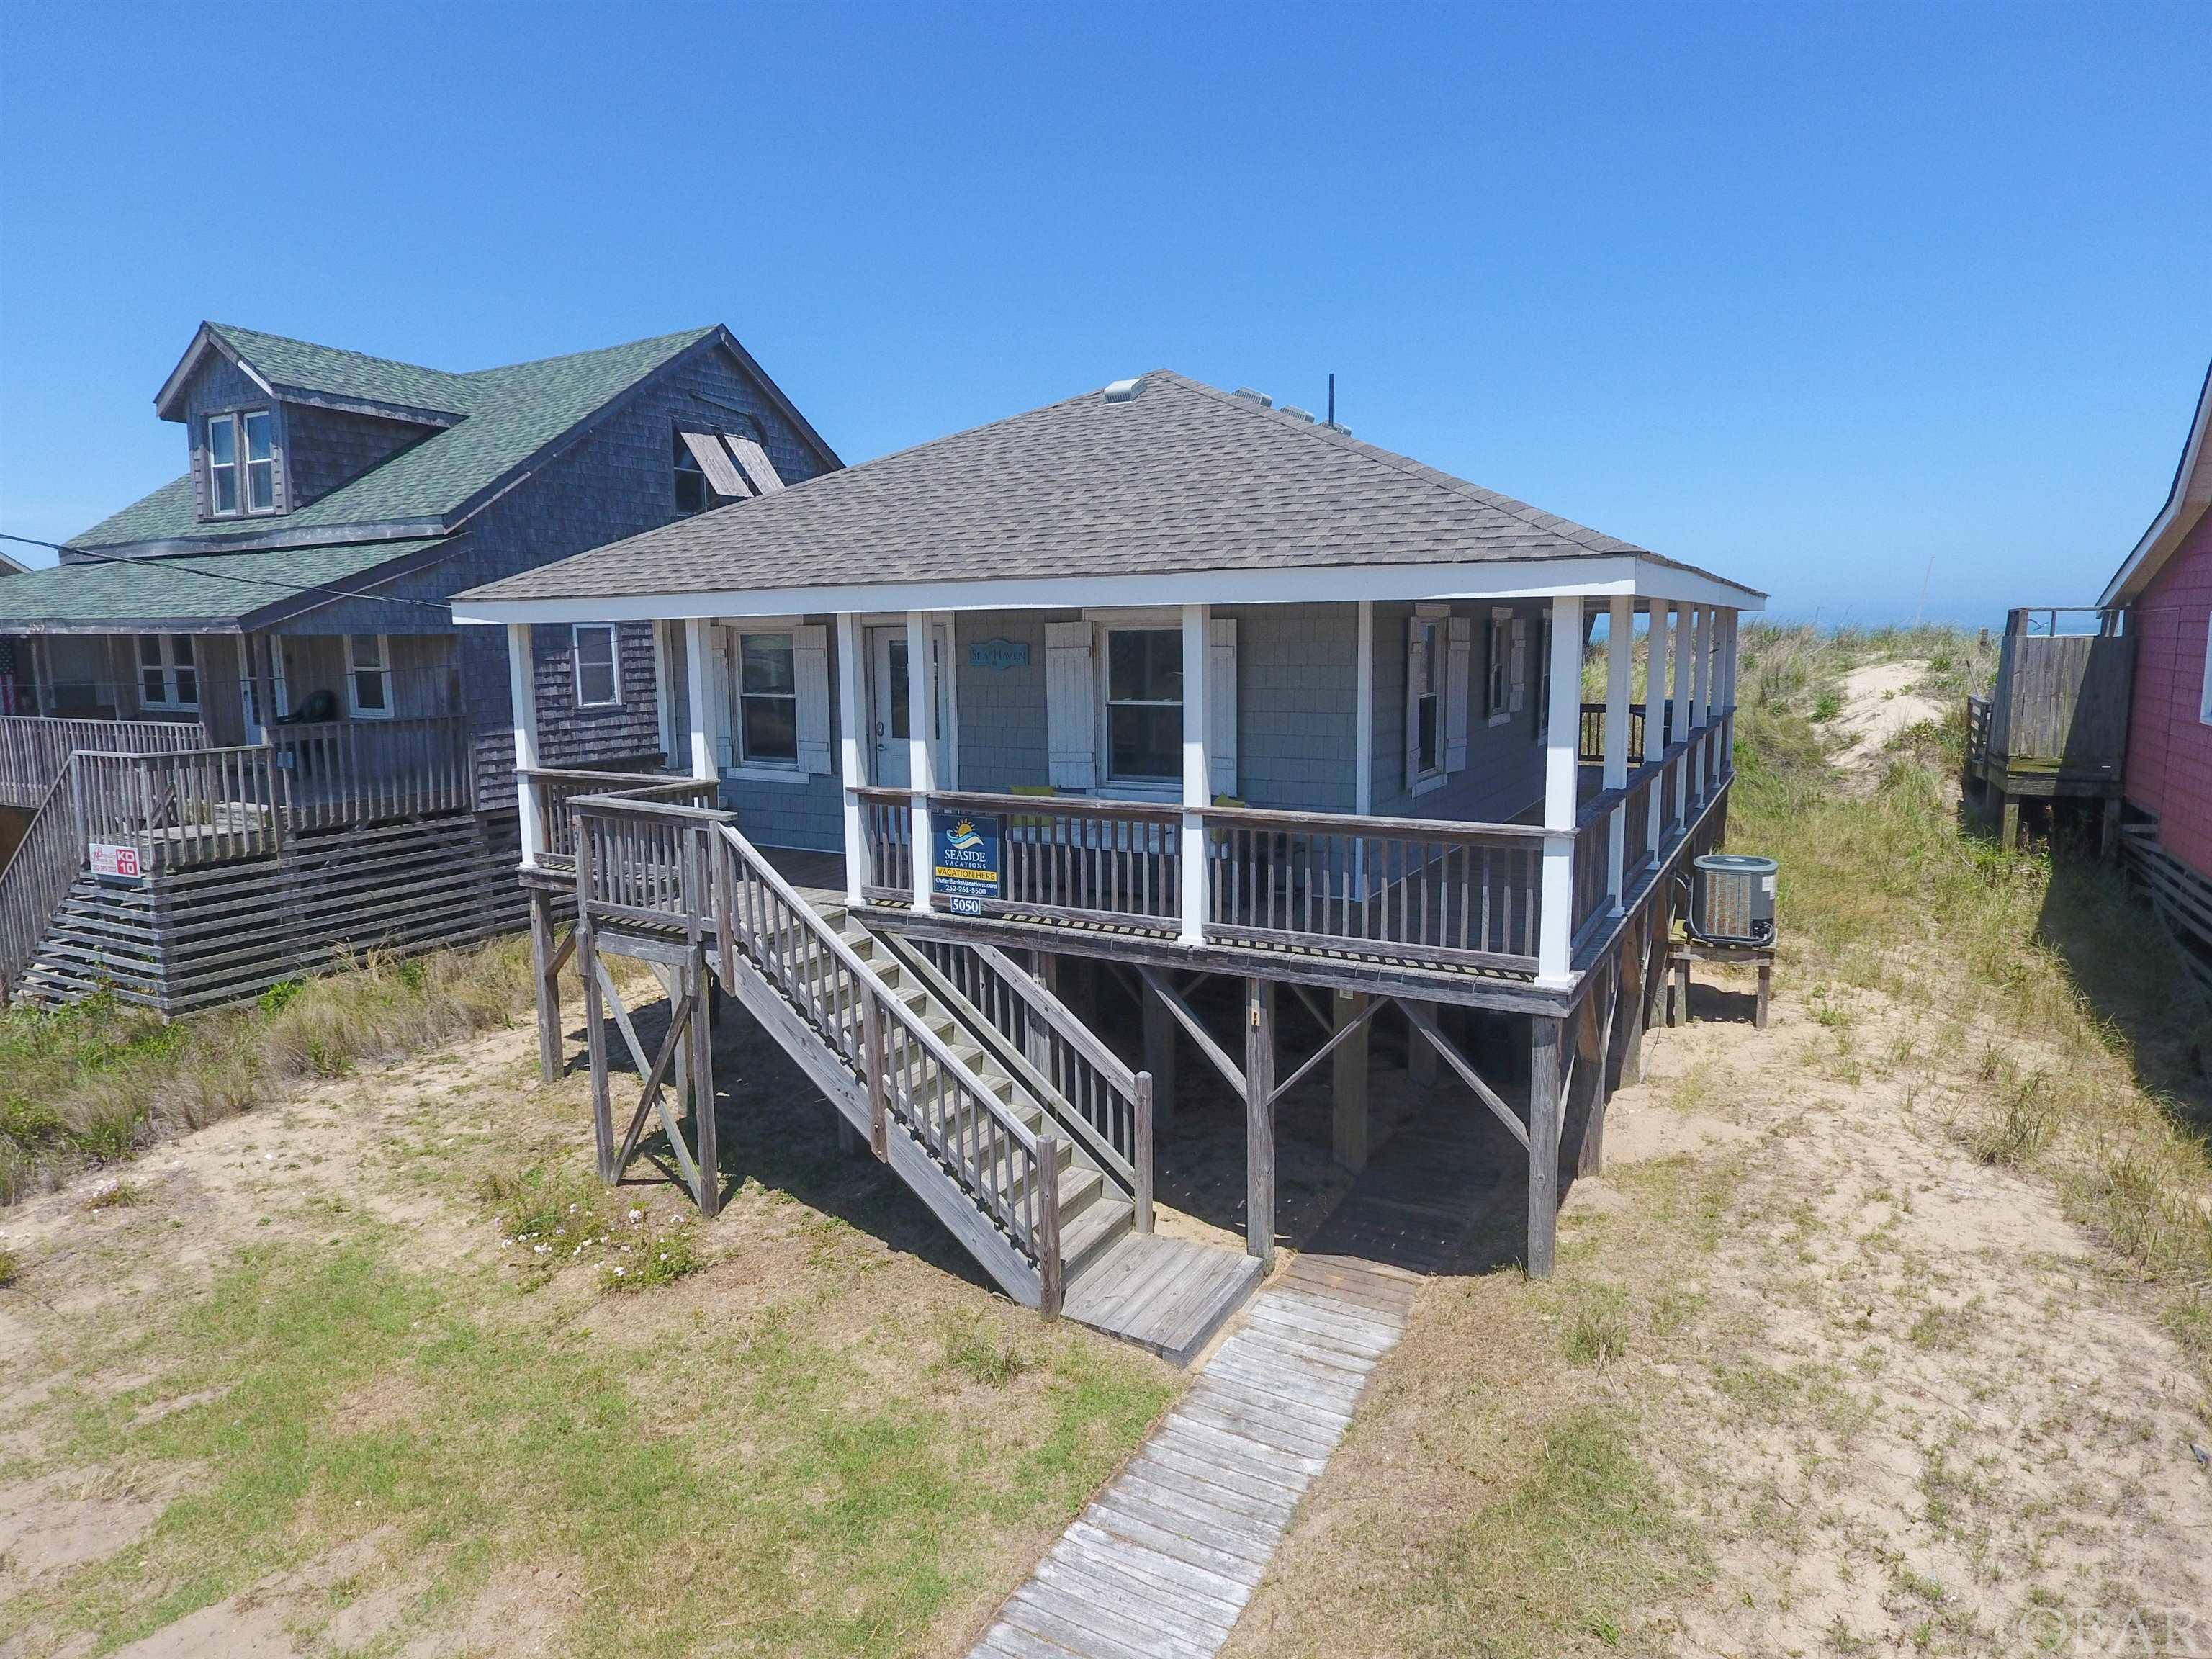 It doesn't get much cuter and quaint than this!  This classic OBX cottage takes you back to the time before the hustle and bustle.  The cottage has all of the original knotty pine tongue and groove paneling with it's stunning original pin flooring. The kitchen has been updated with soft close, high quality cabinets, granite countertops and stainless steel appliances.  This home sits on all new 8X8 pressure treated pilings, has newer underpinning, and a BRAND NEW ROOF (March 2022).  This little retreat would be a great investment or second home.  There is something peaceful about this little slice of OBX Oceanfront.  Wake up and watch the sunrise from your own porch, gaze at the surfers and fisherman doing their thing at Avalon Fishing pier.